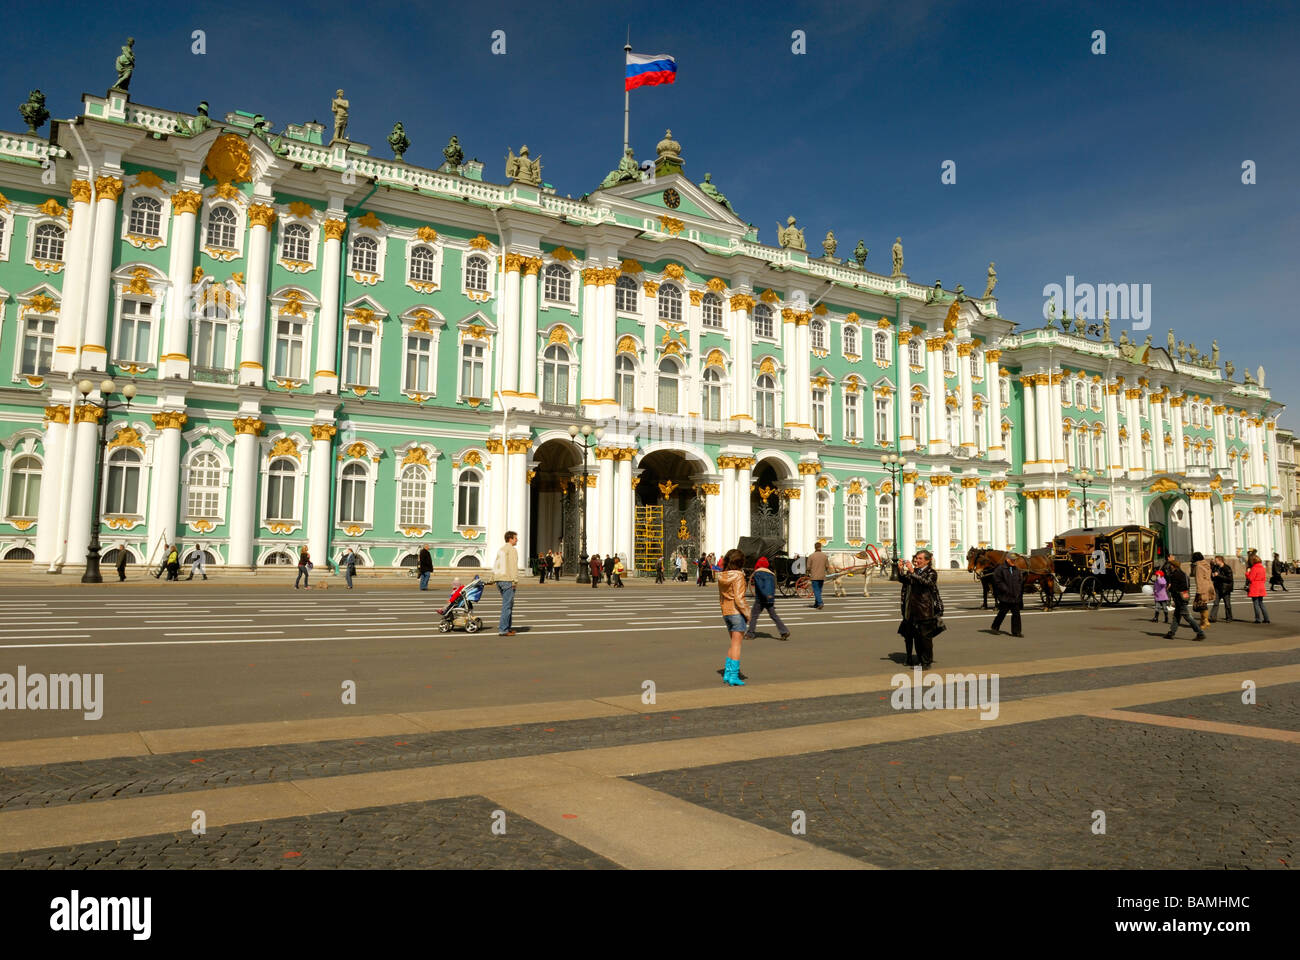 The Winter Palace, the State Hermitage Museum, one of the largest palaces in the world containing over a thousand rooms and ... Stock Photo